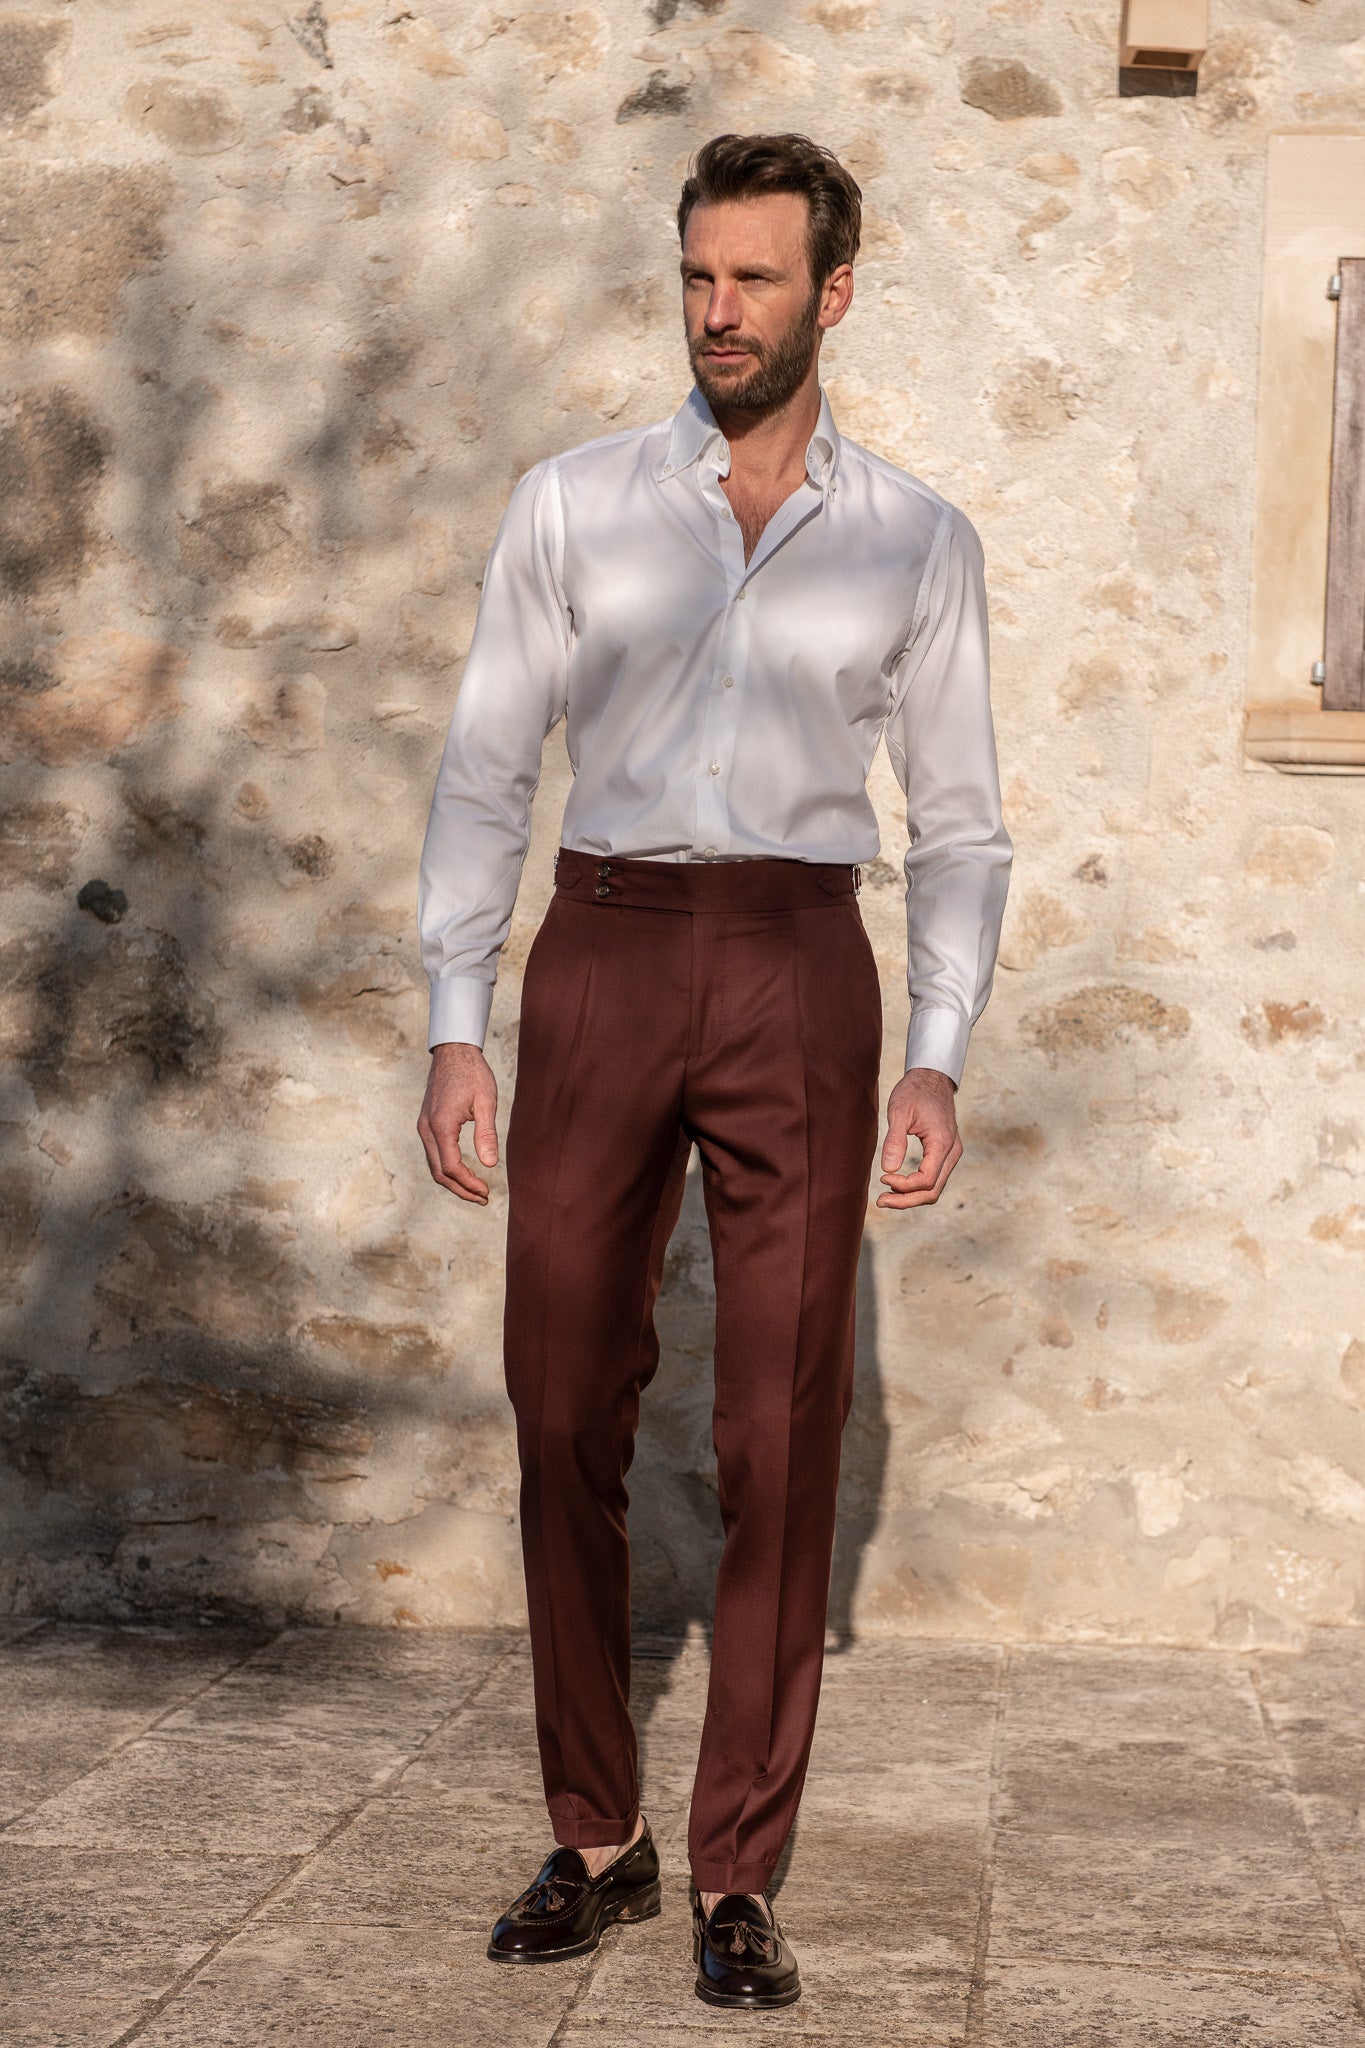 Burgundy trousers "Soragna Capsule Collection" - Made in Italy